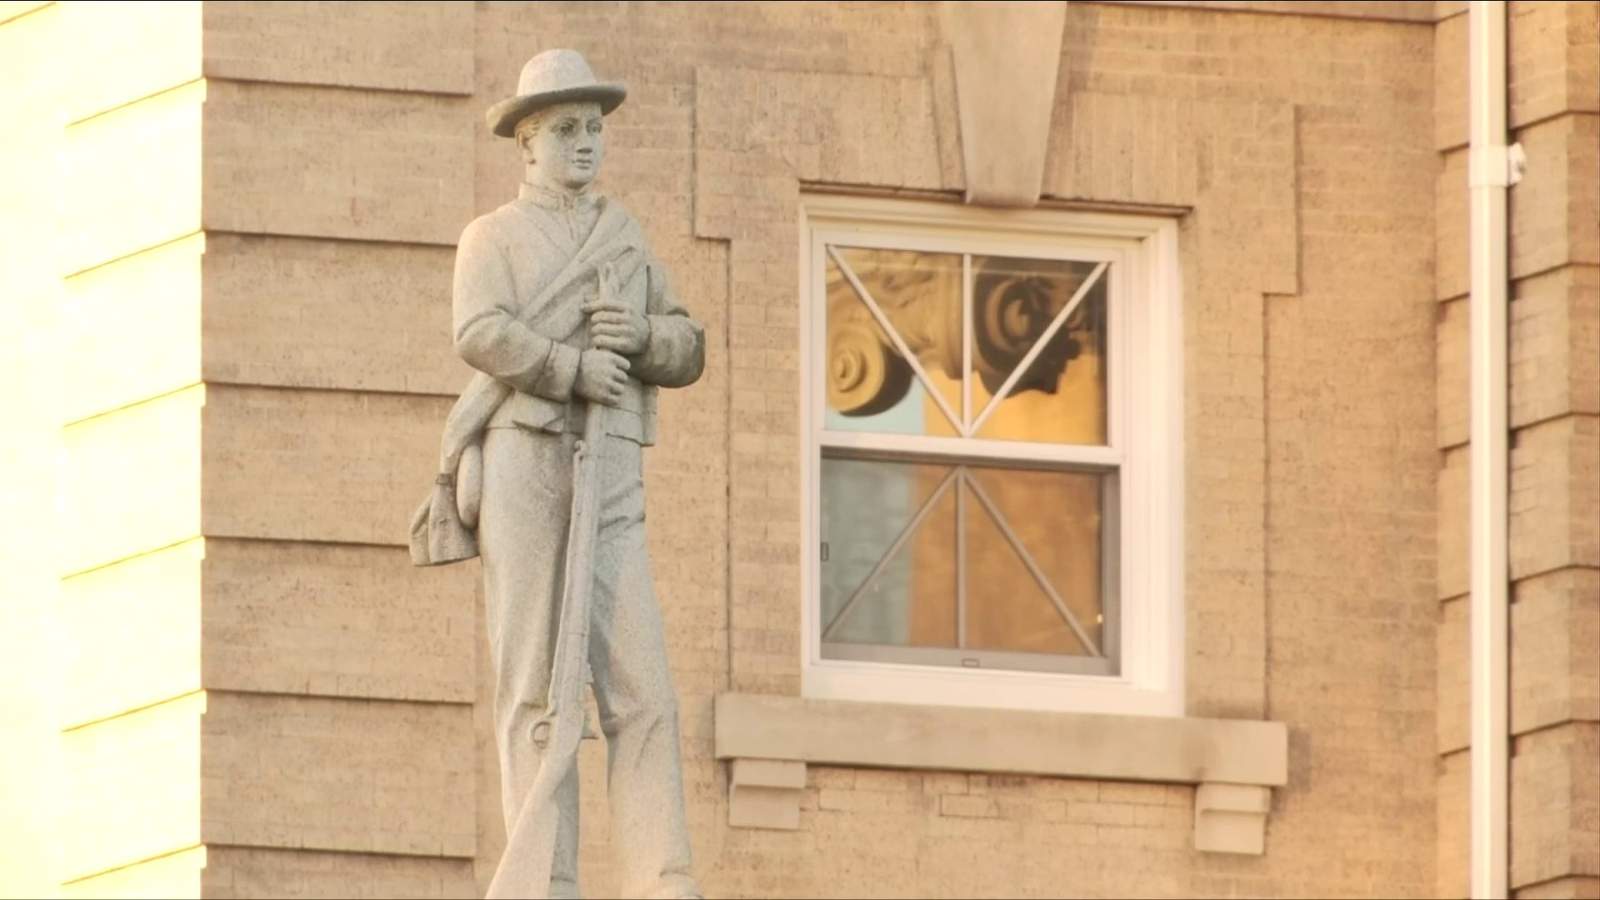 Roanoke College students, alumni and college president call for removal of Confederate statue Salem